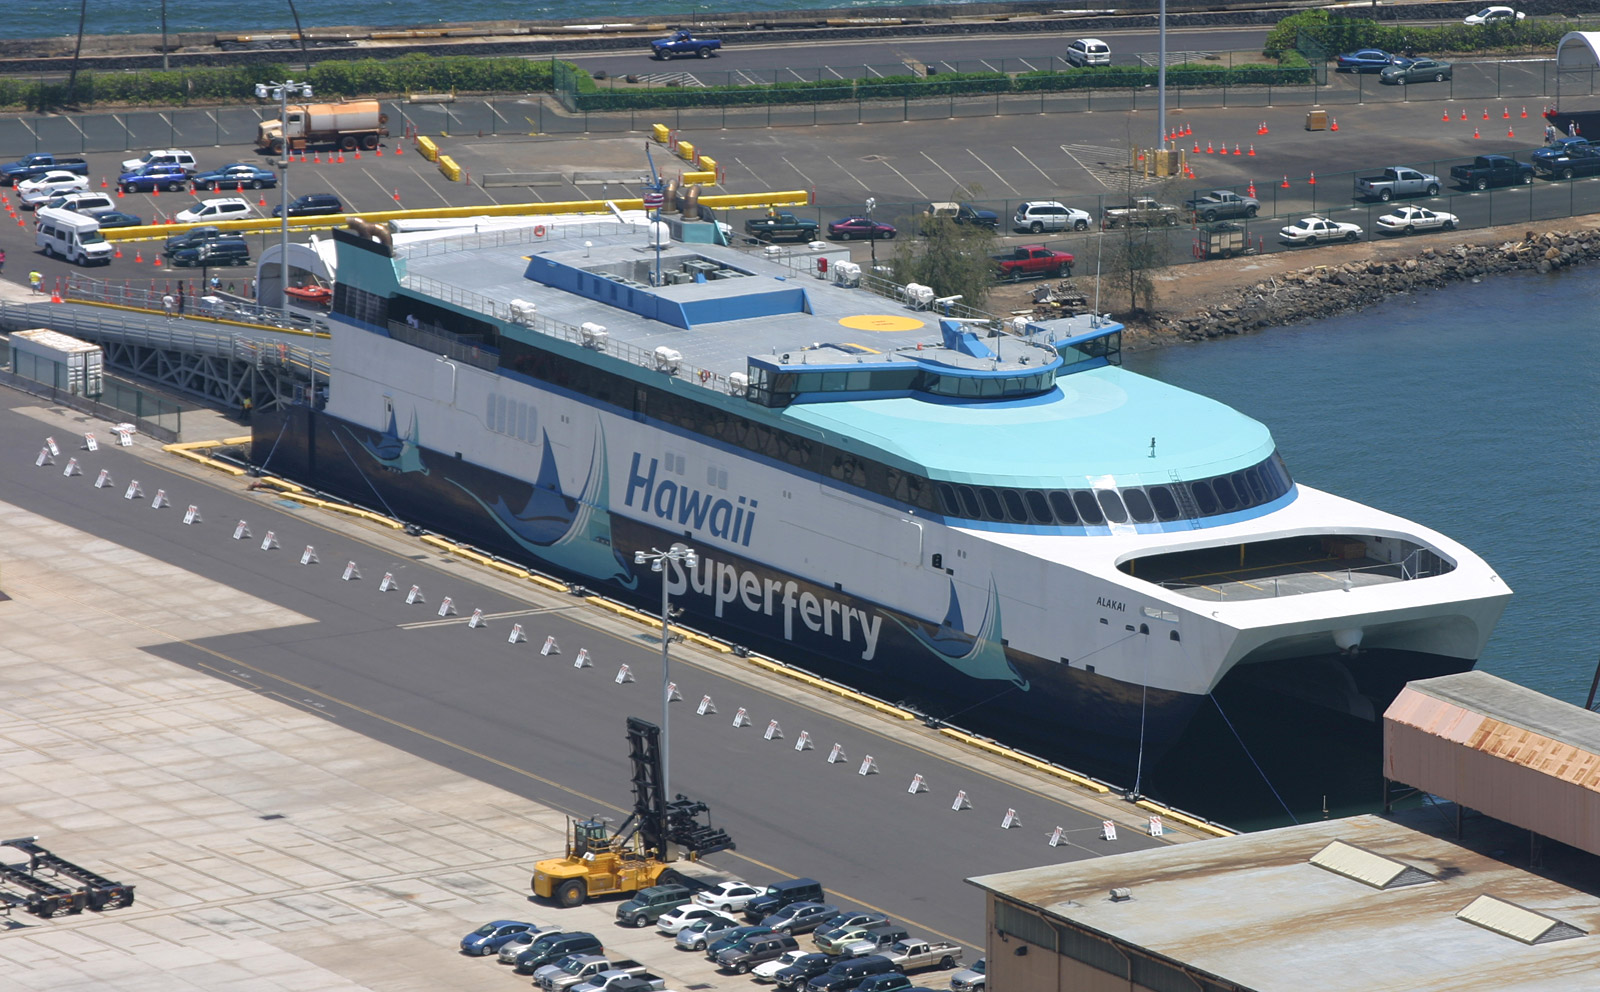 Why aren’t there many ferries in Hawaii?